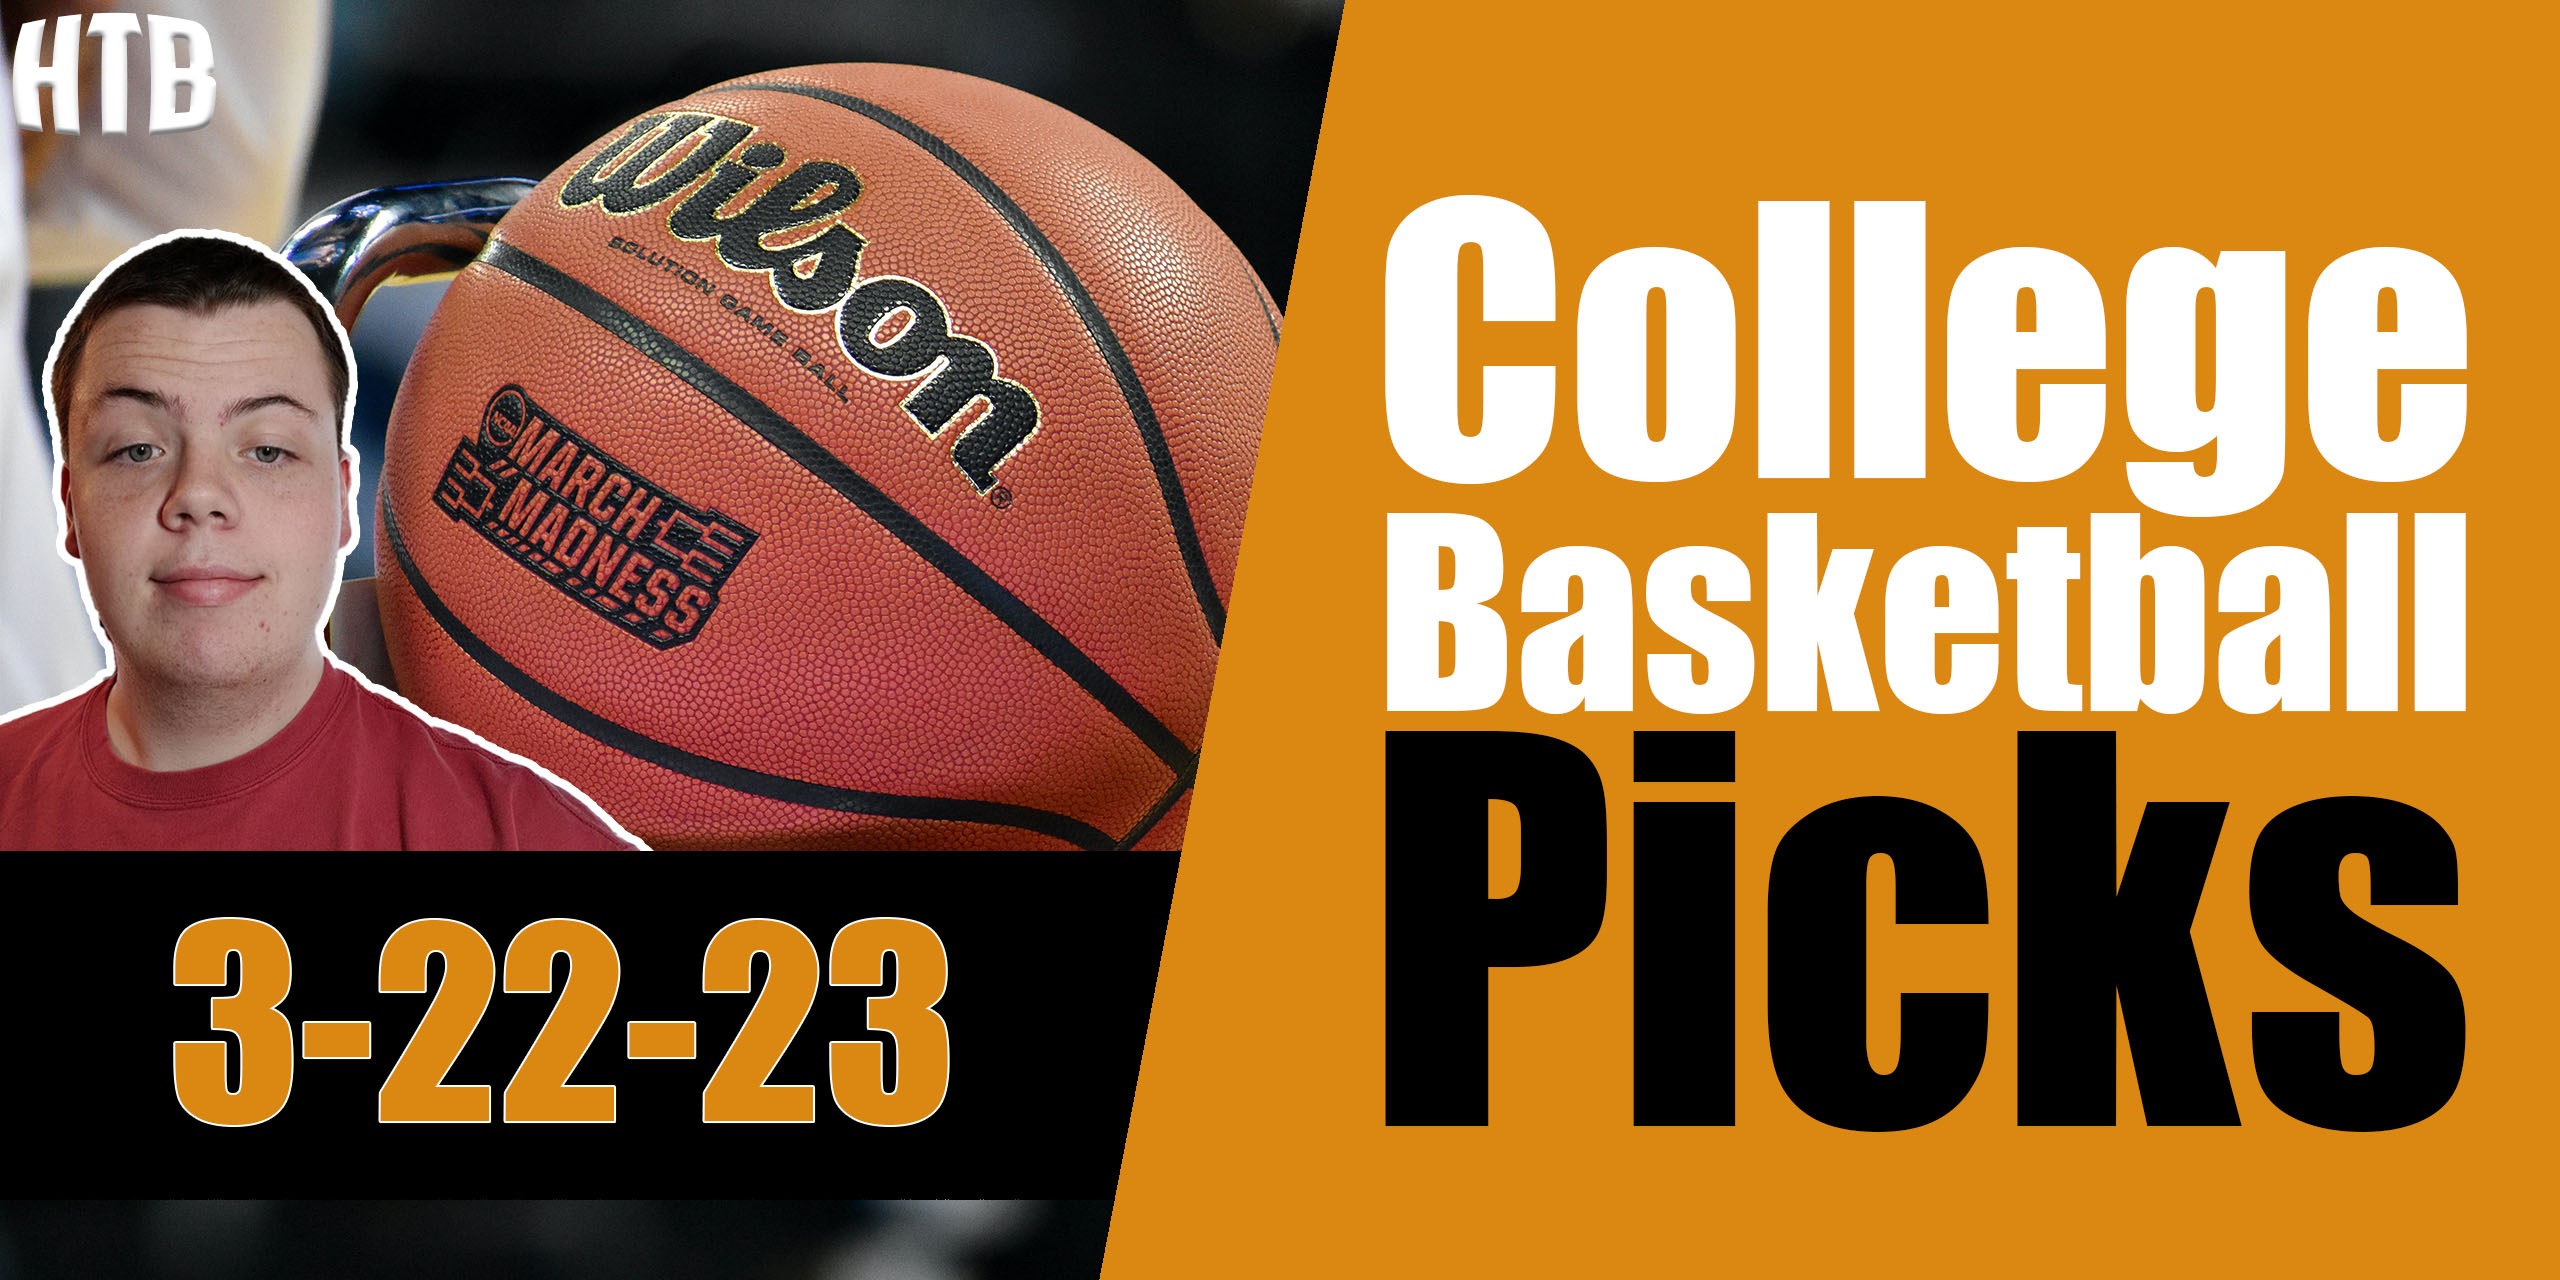 Read more about the article College Basketball Picks 3/22/23 | Chris’ Picks